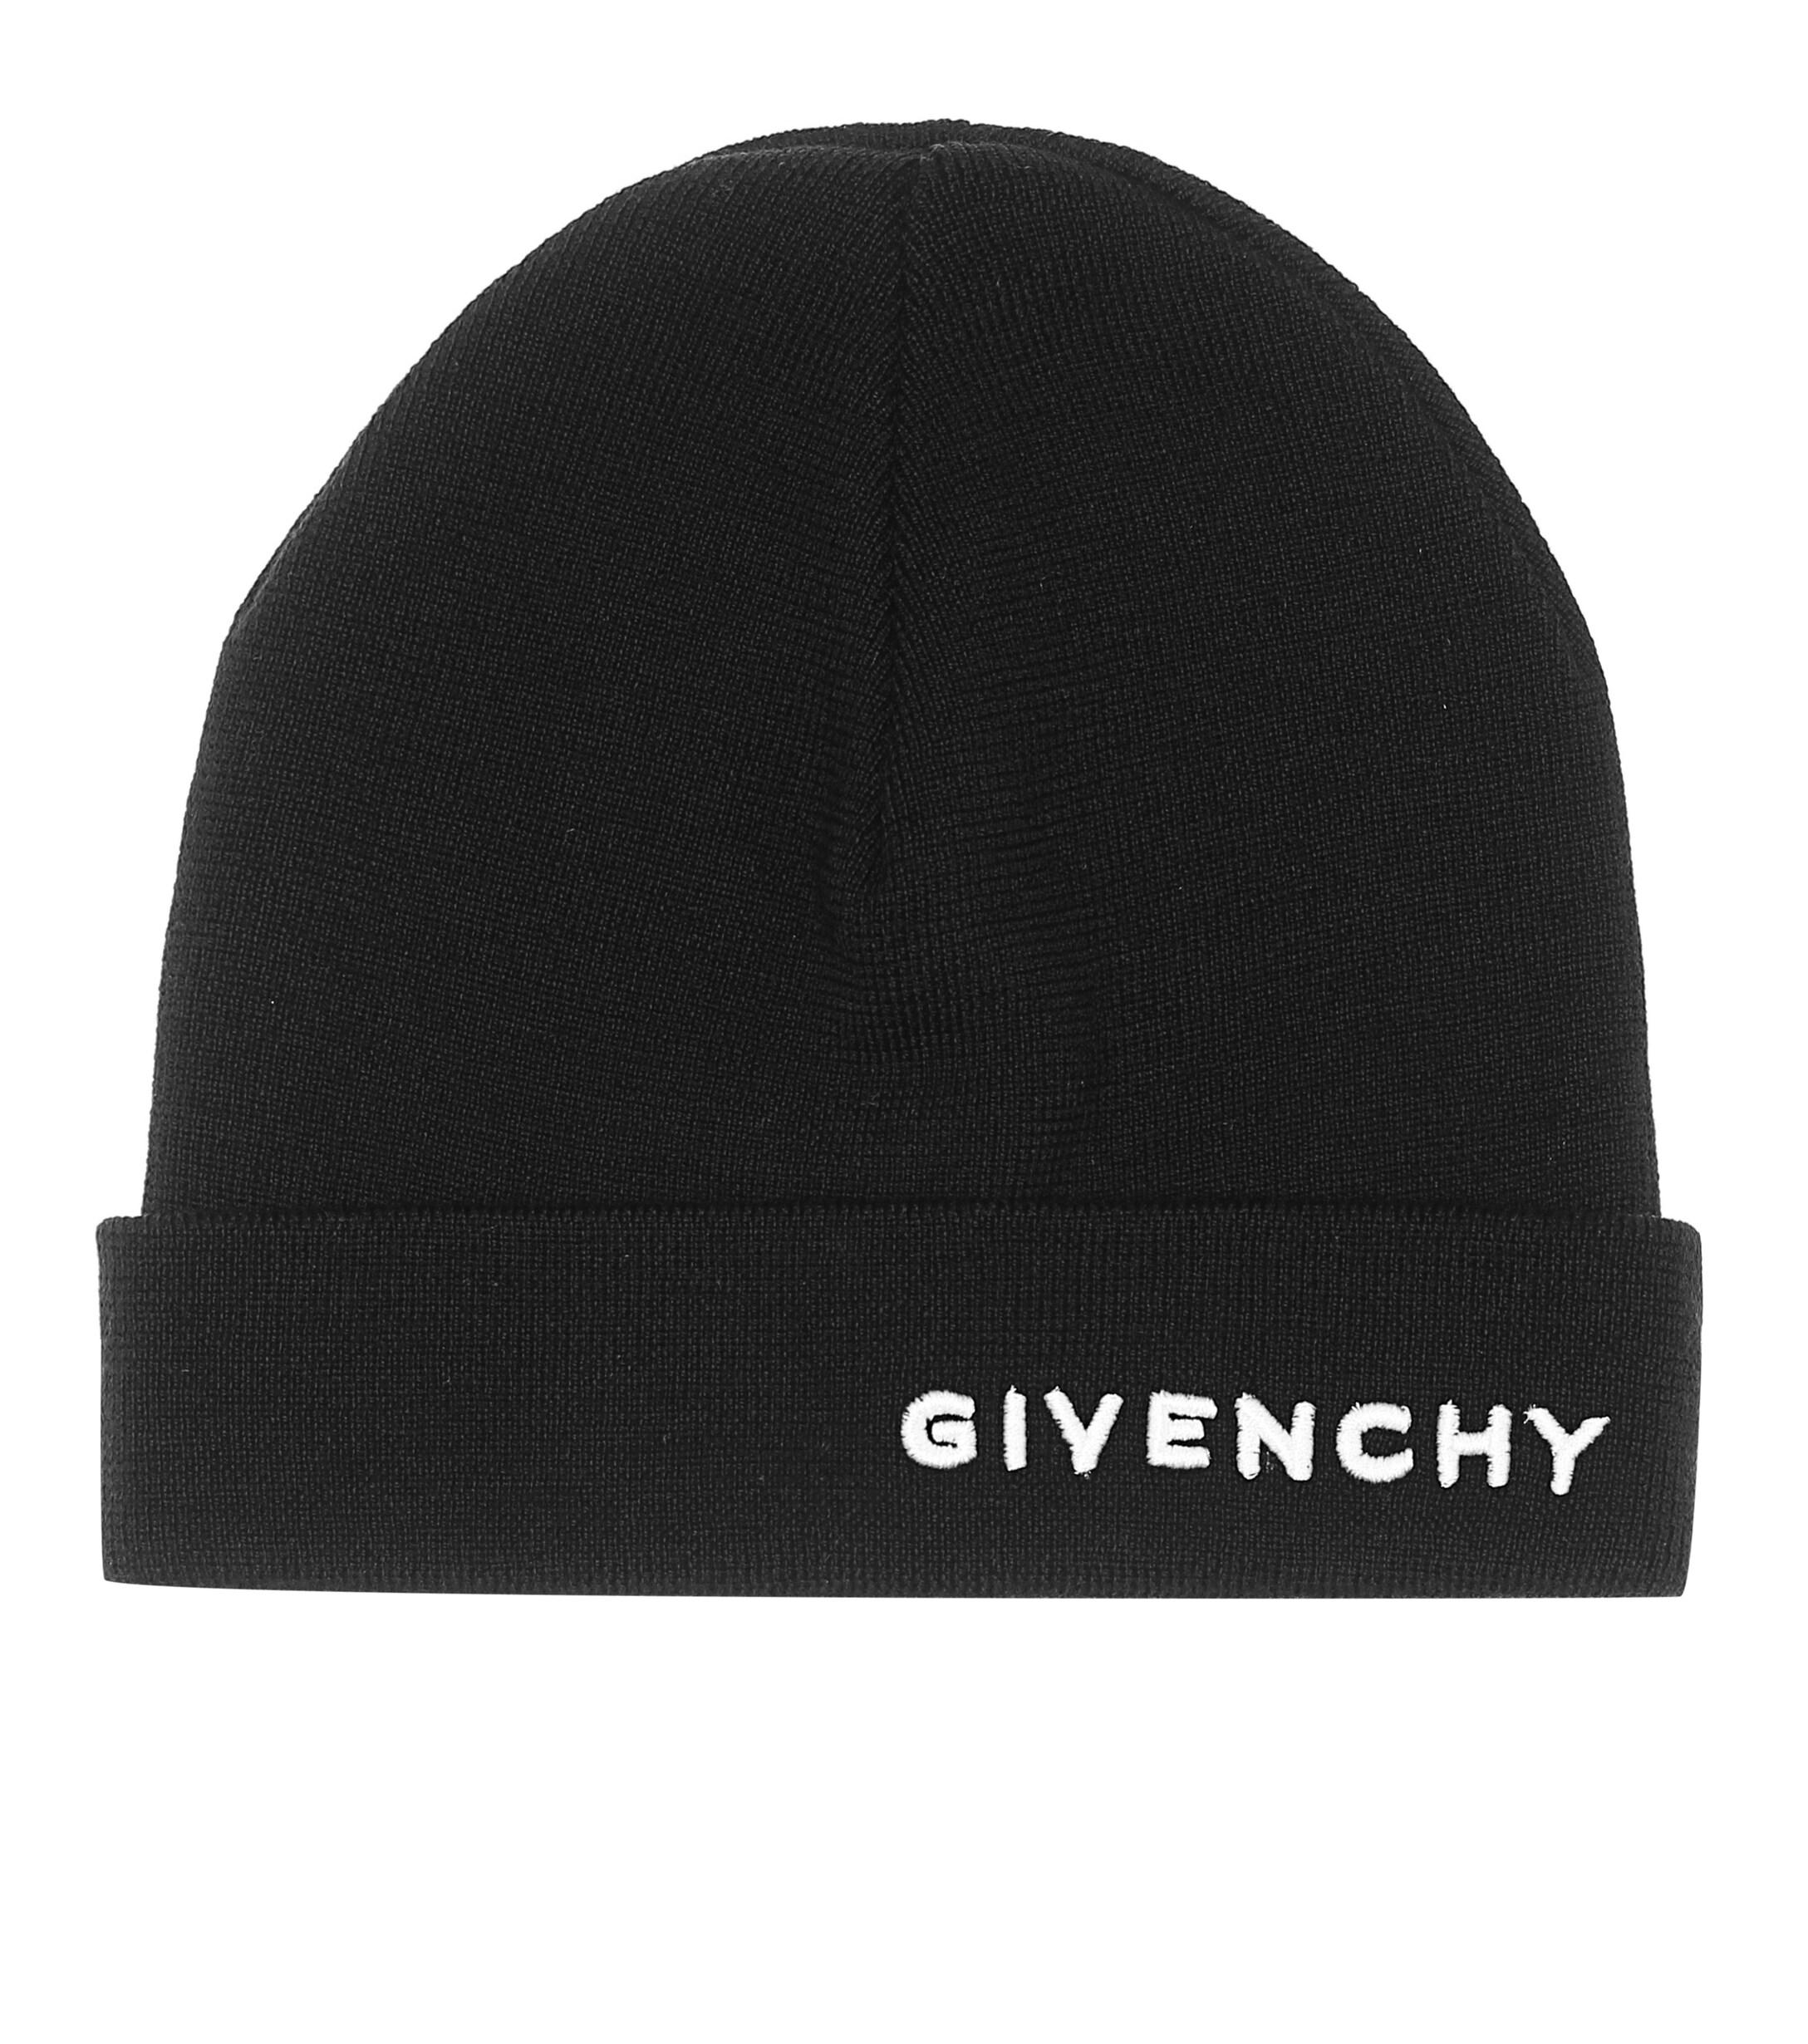 Givenchy Wool Logo Embroidered Beanie Hat in Black - Lyst